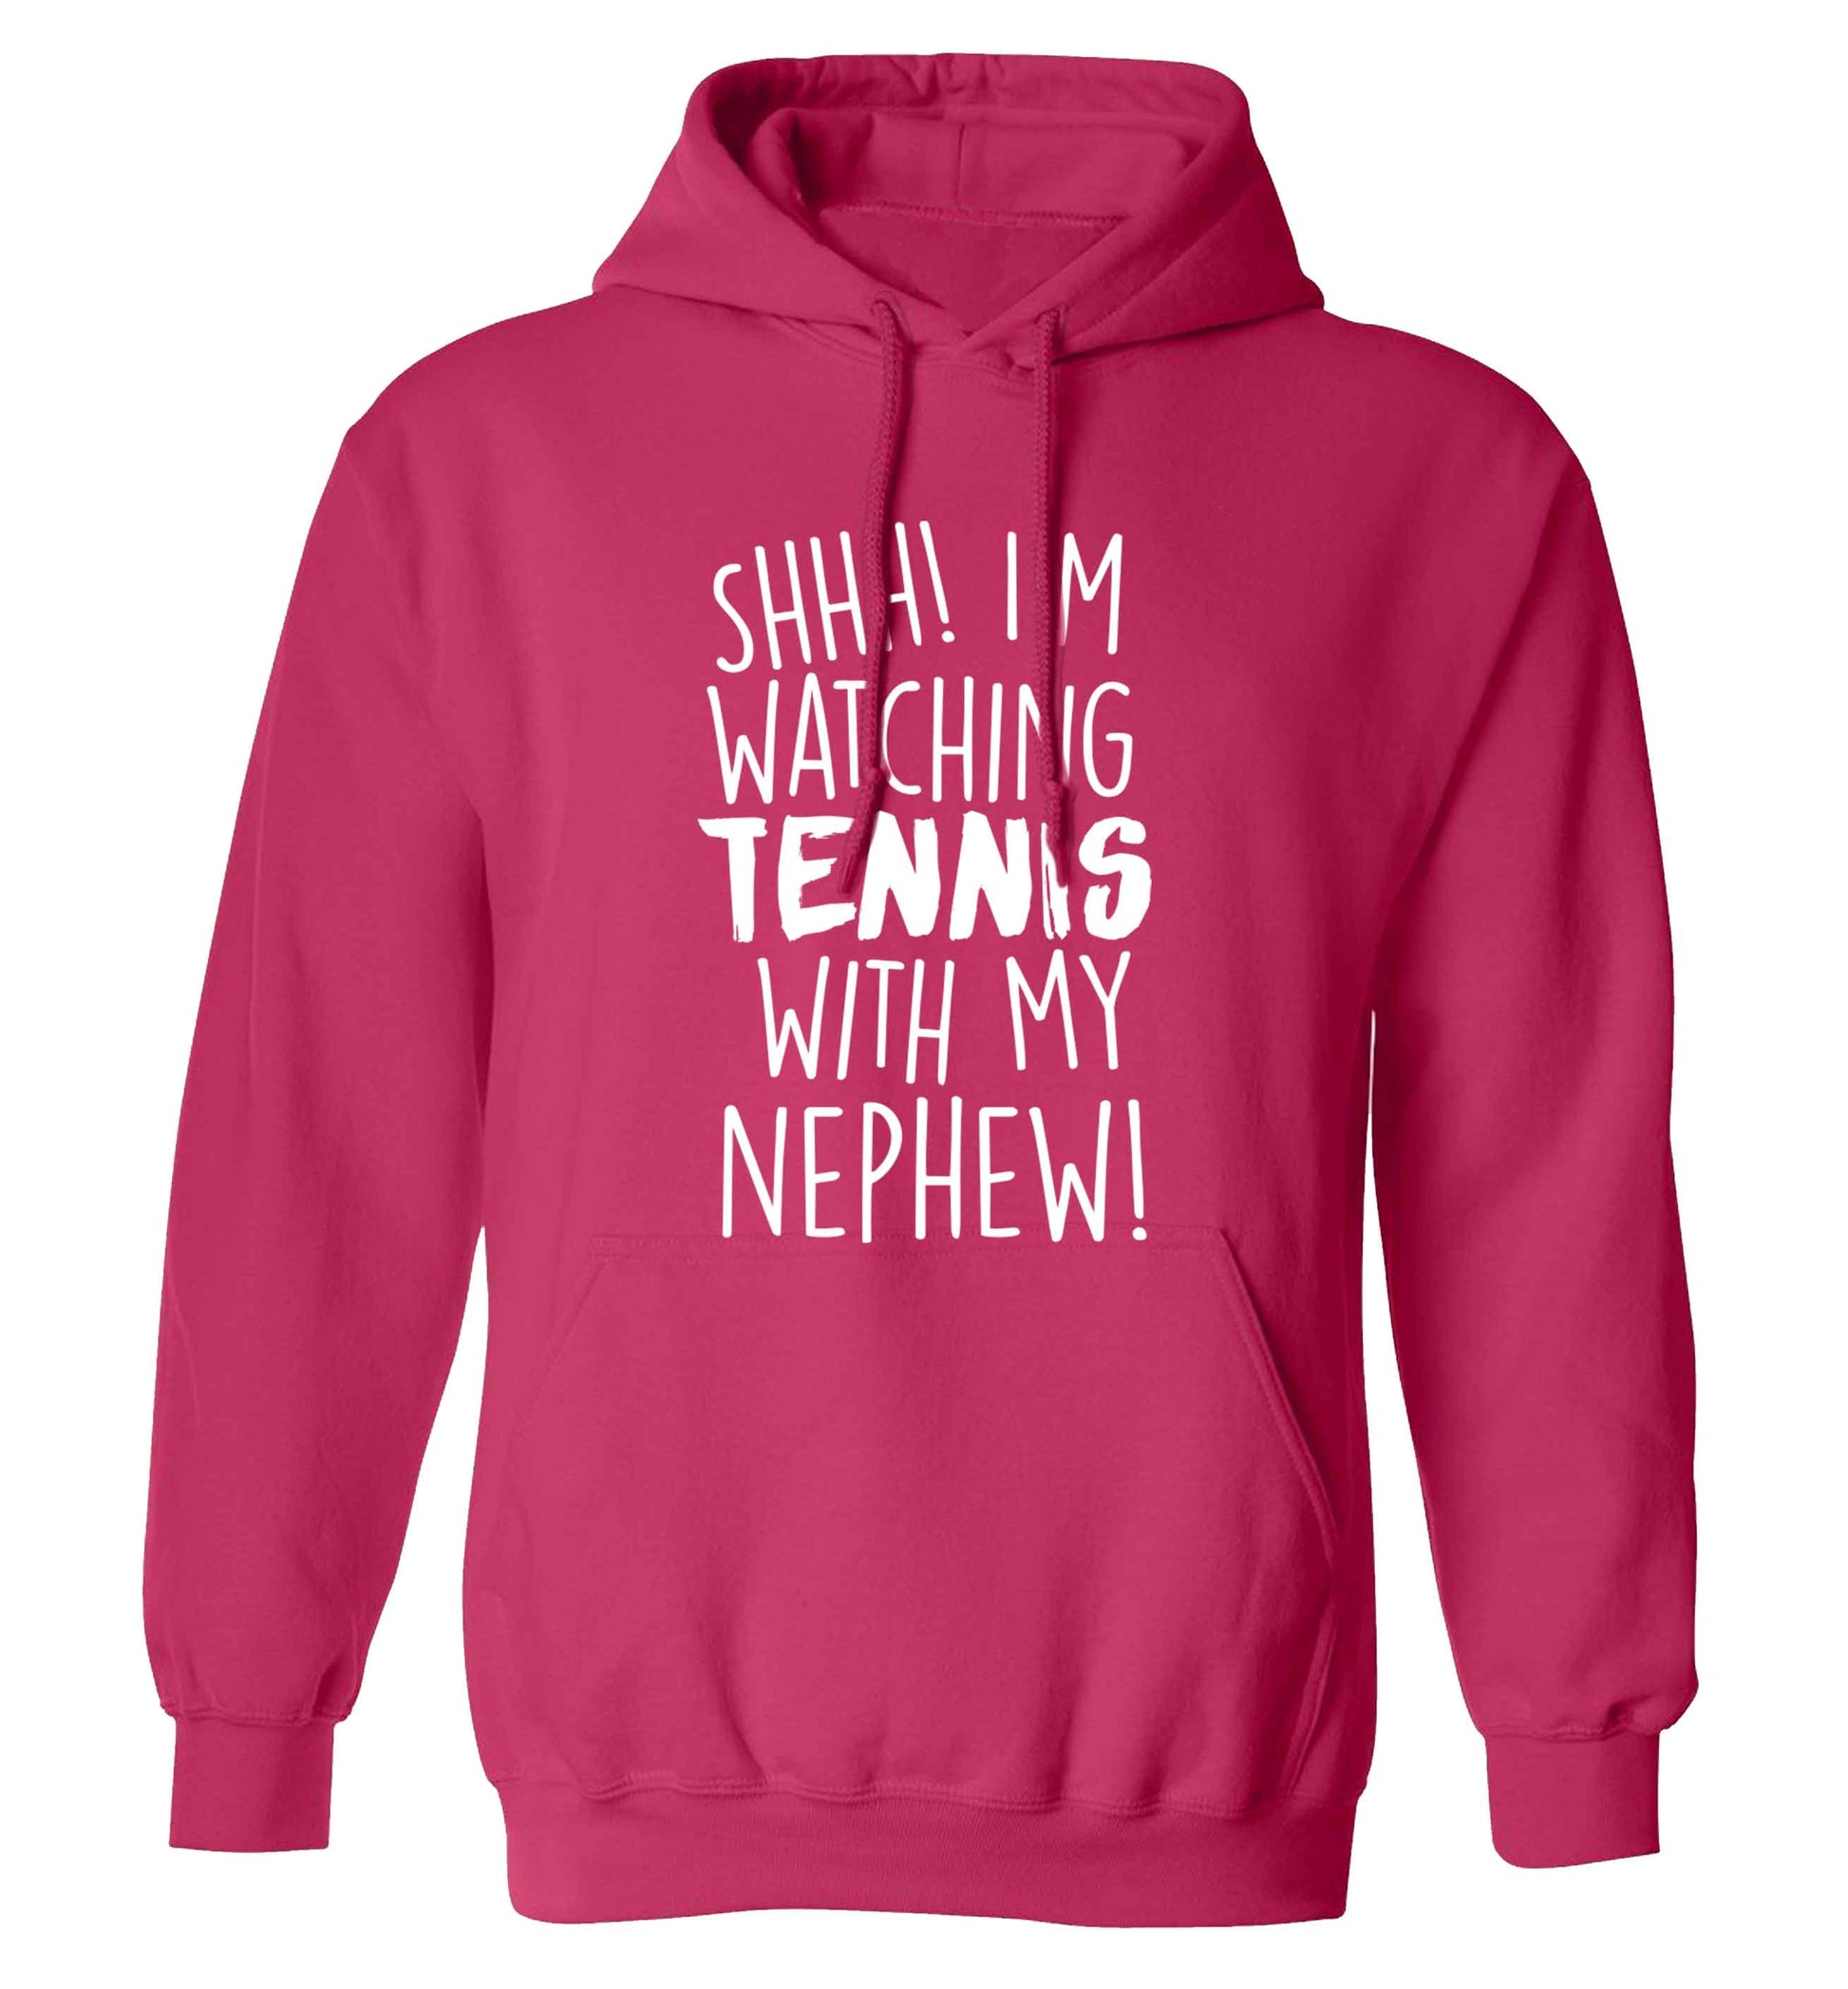 Shh! I'm watching tennis with my nephew! adults unisex pink hoodie 2XL